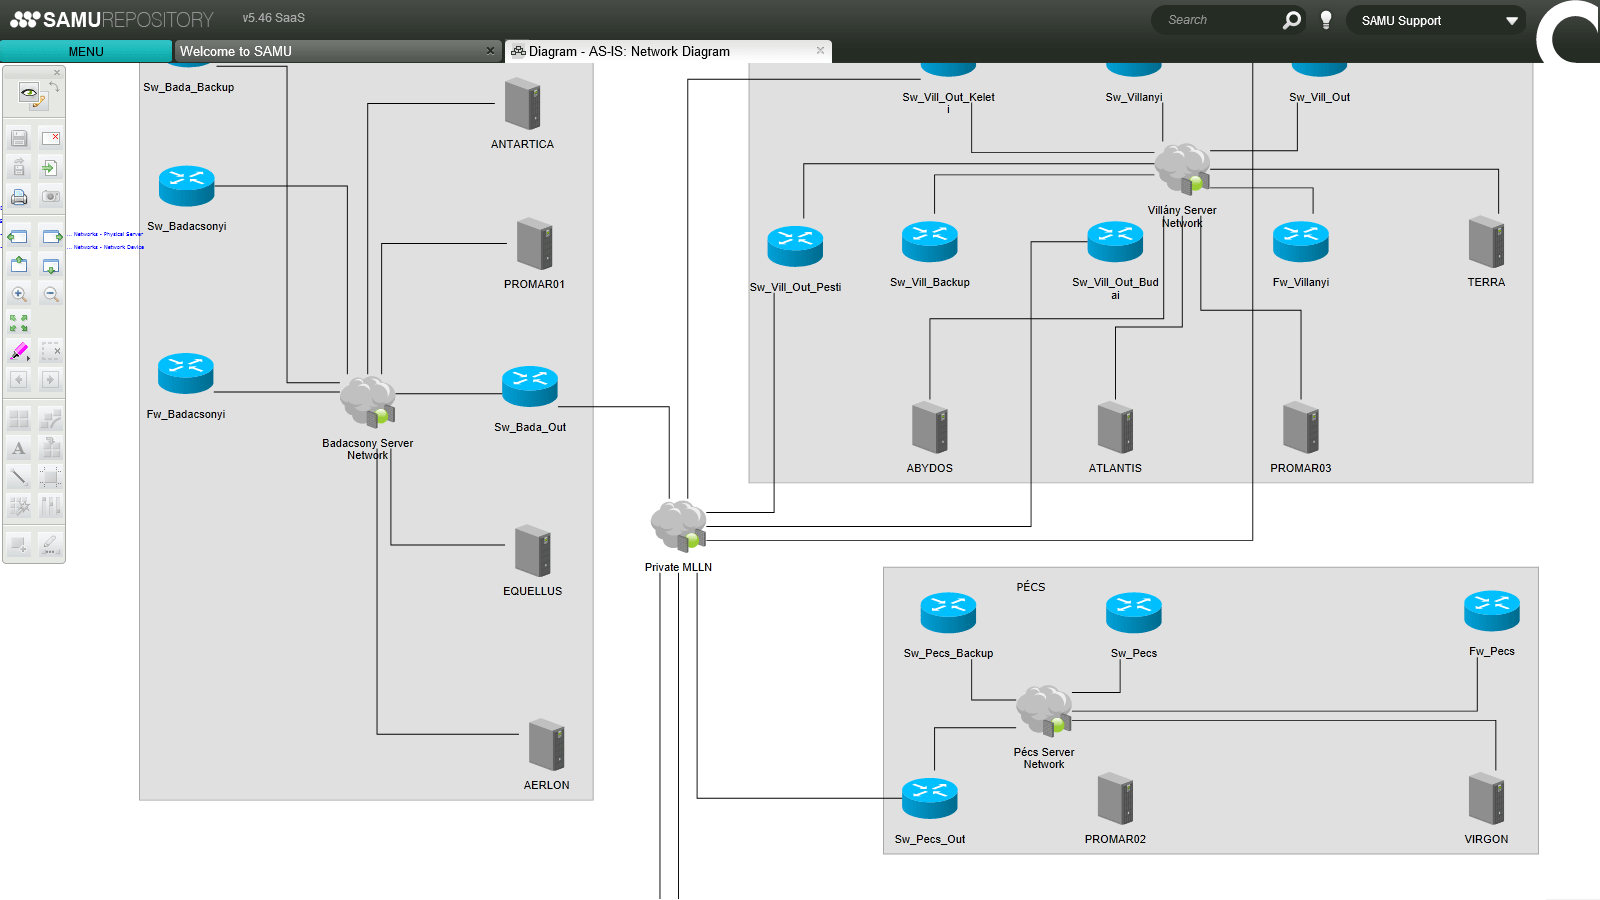 AS-IS infrastructure physical network diagram by data centres